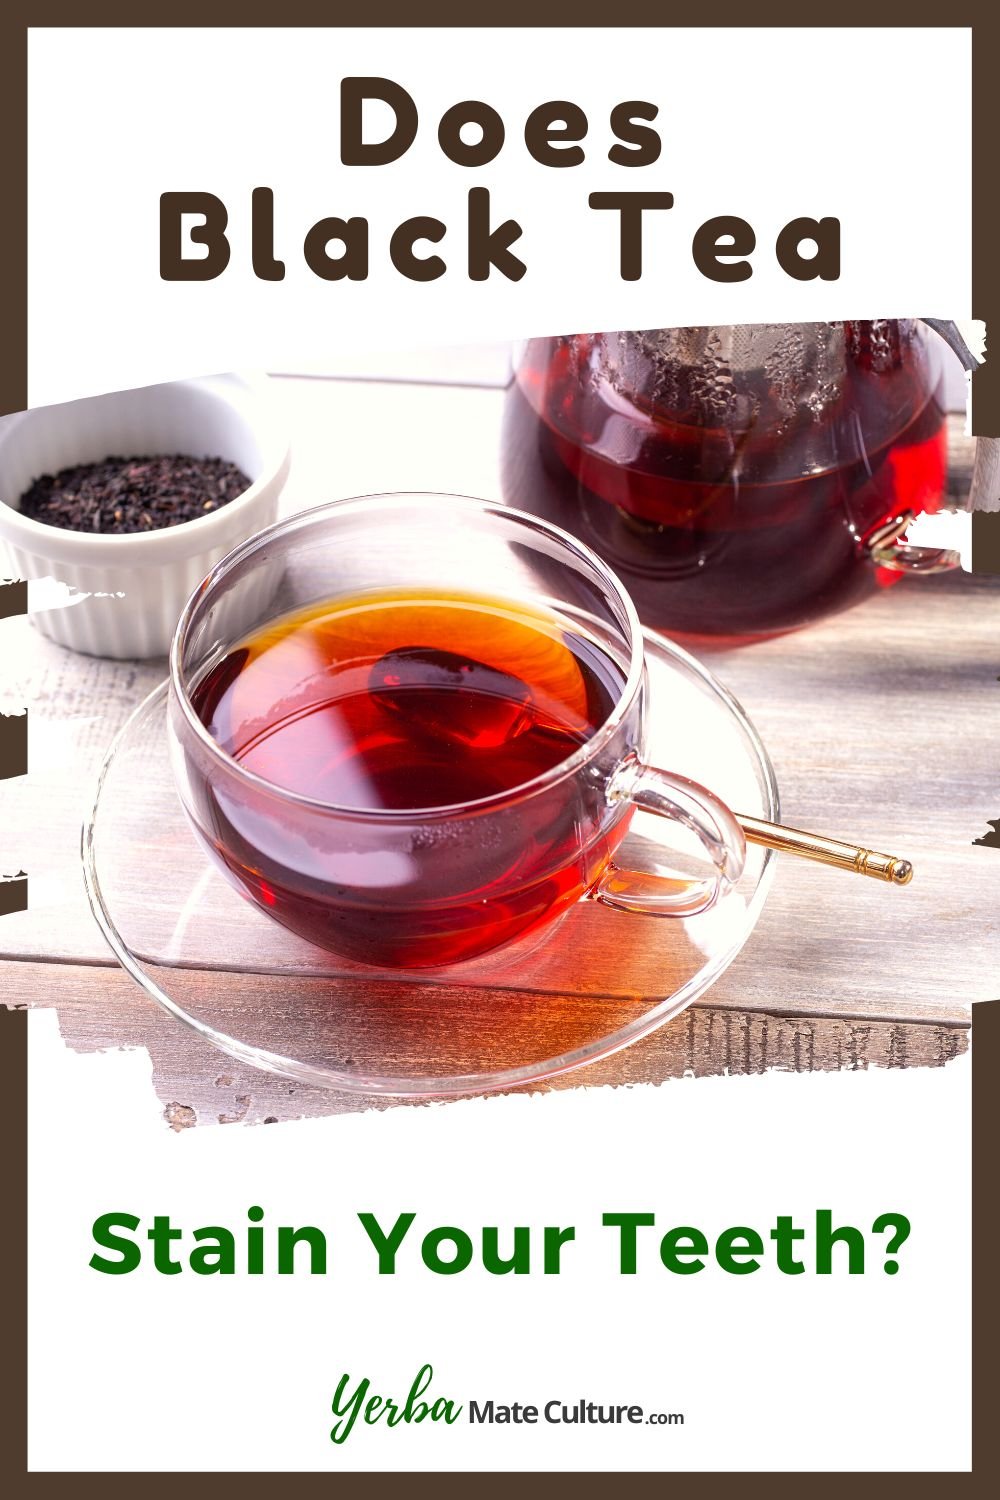 Does Black Tea Stain Your Teeth